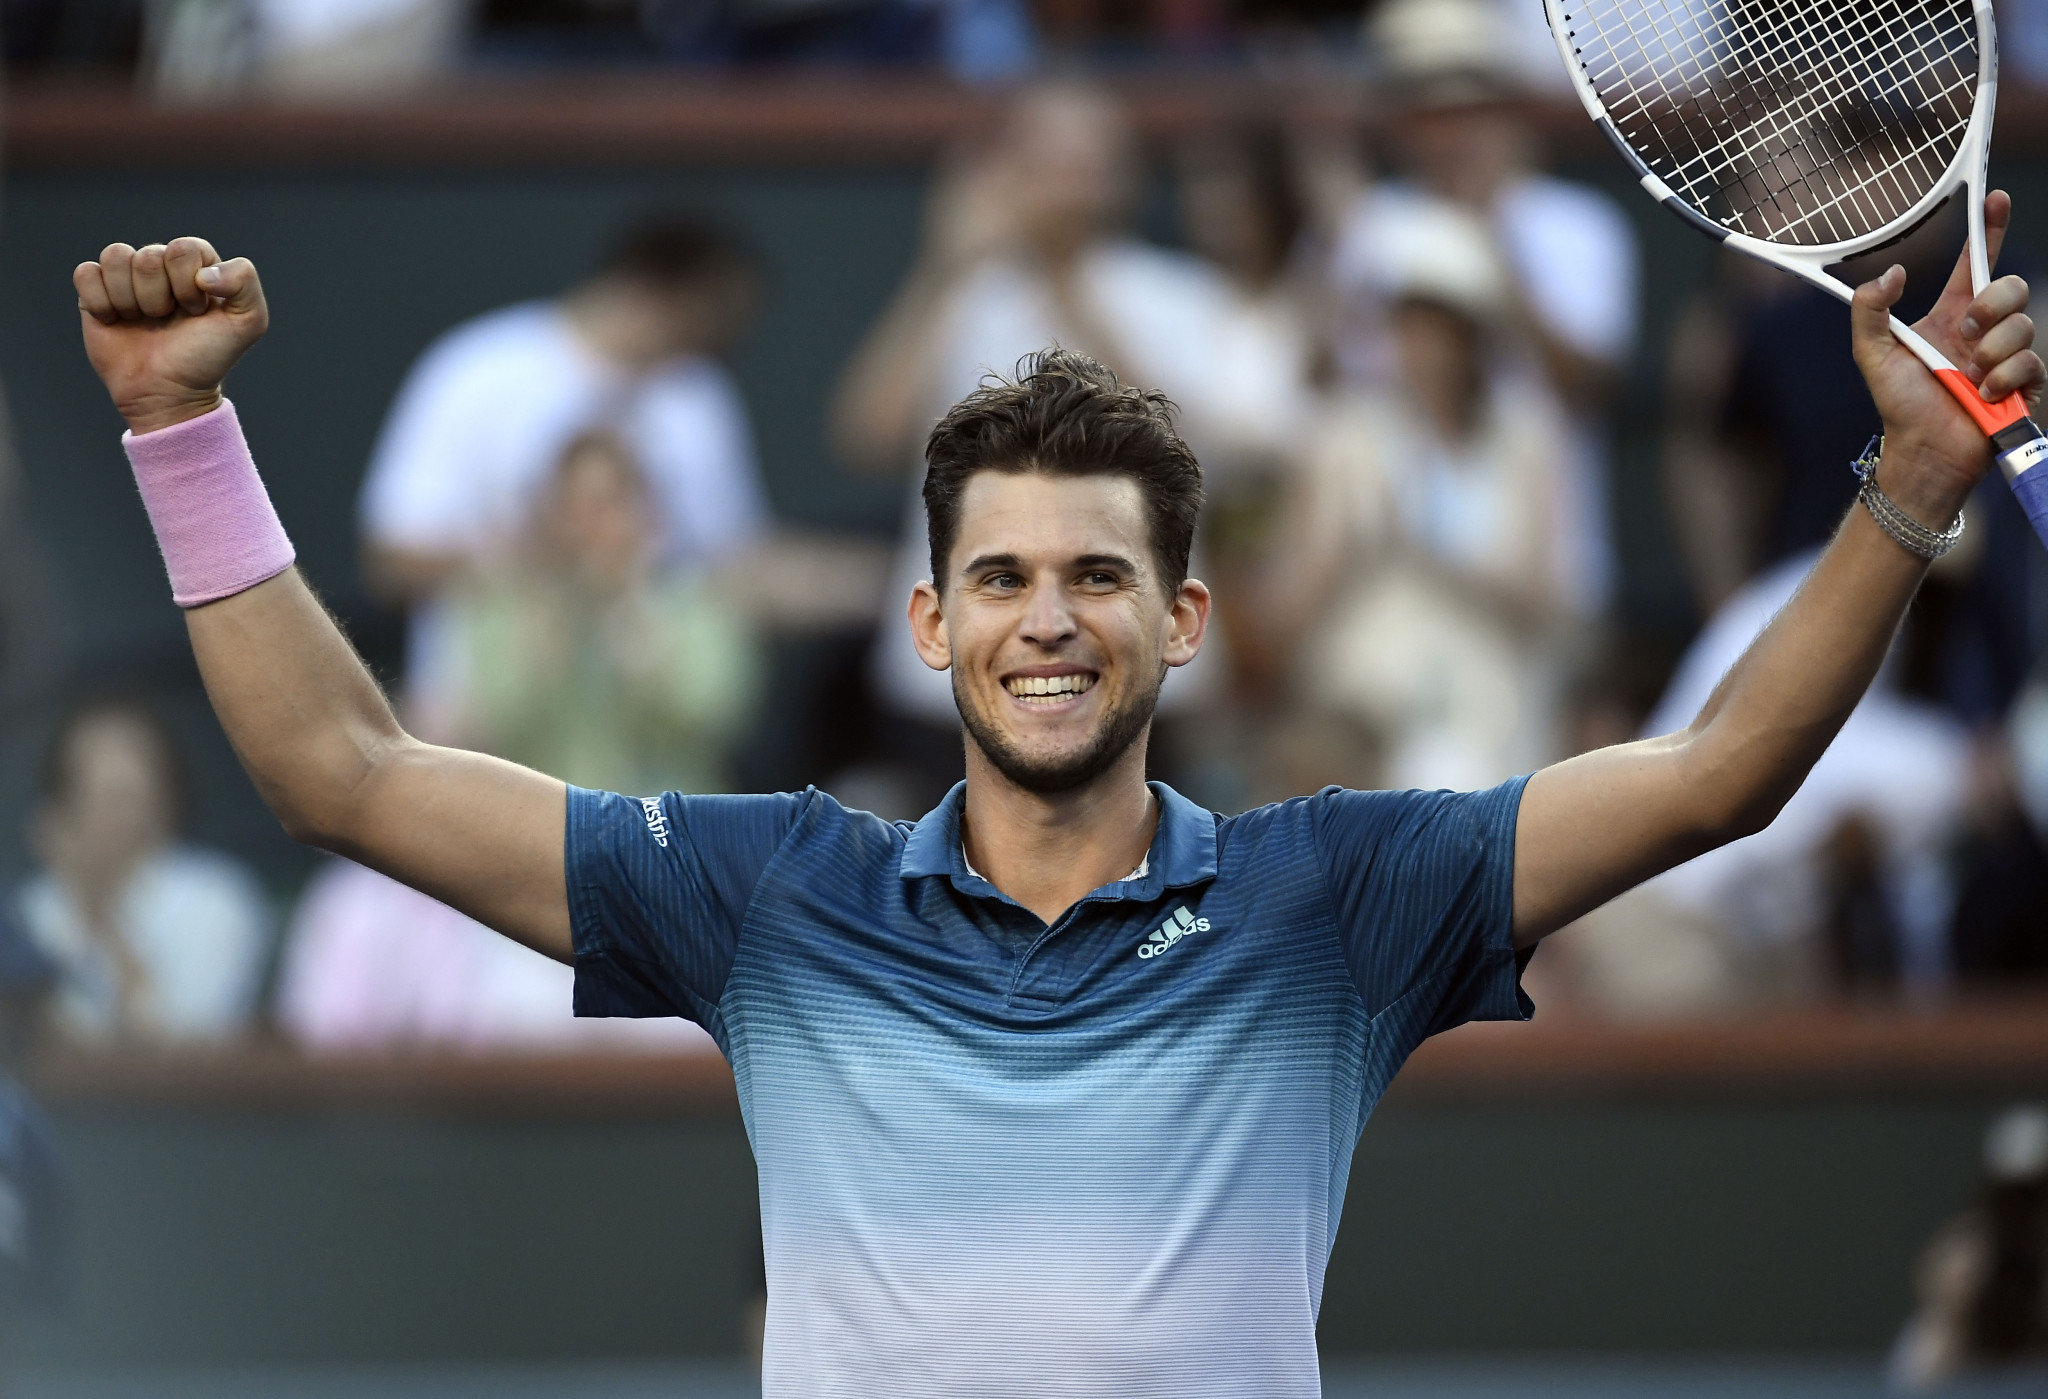 Dominic Thiem came from a set down to beat Roger Federer in the men's final ©Getty Images